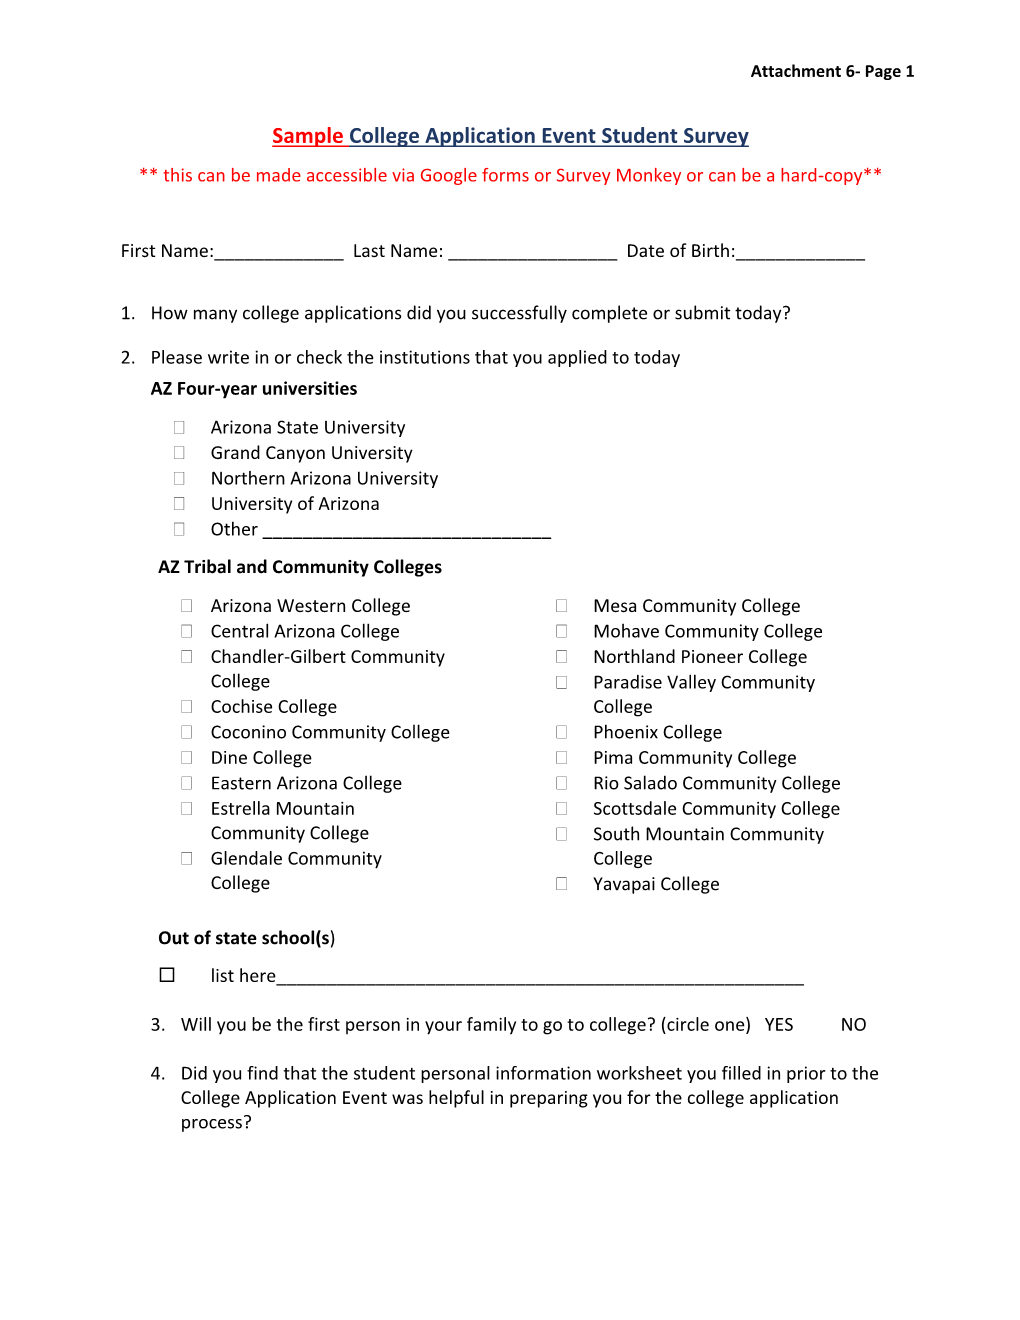 Sample College Application Event Student Survey ** This Can Be Made Accessible Via Google Forms Or Survey Monkey Or Can Be a Hard-Copy**